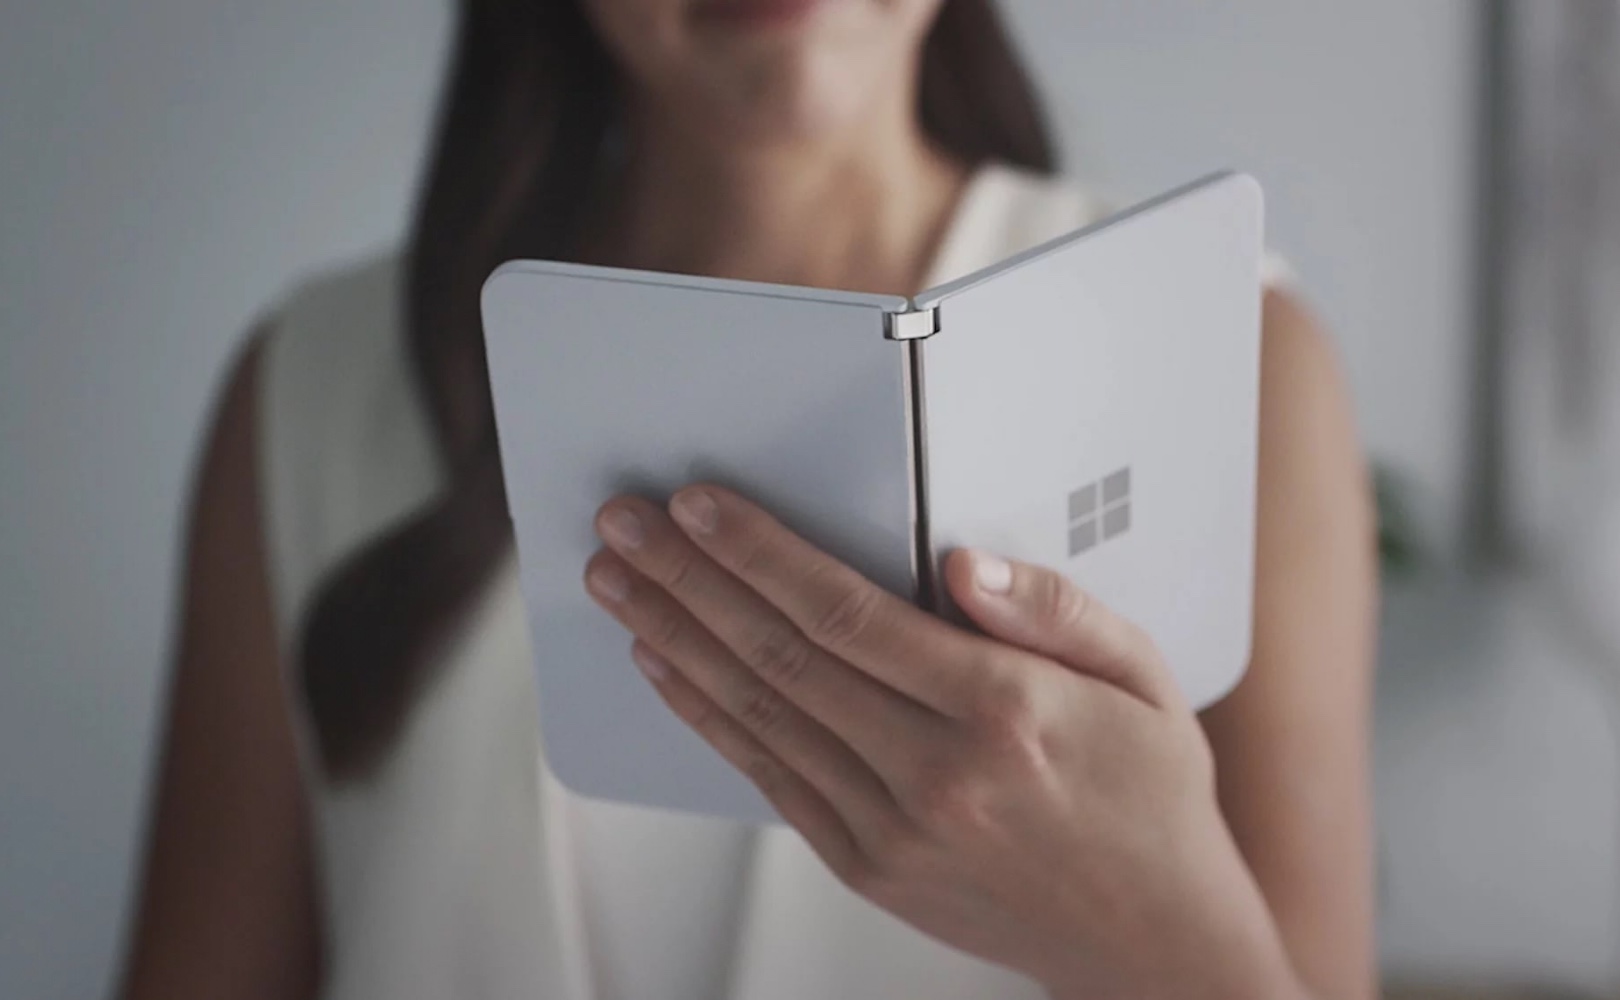 Surface Duo 2 specifications in Geekbench benchmark